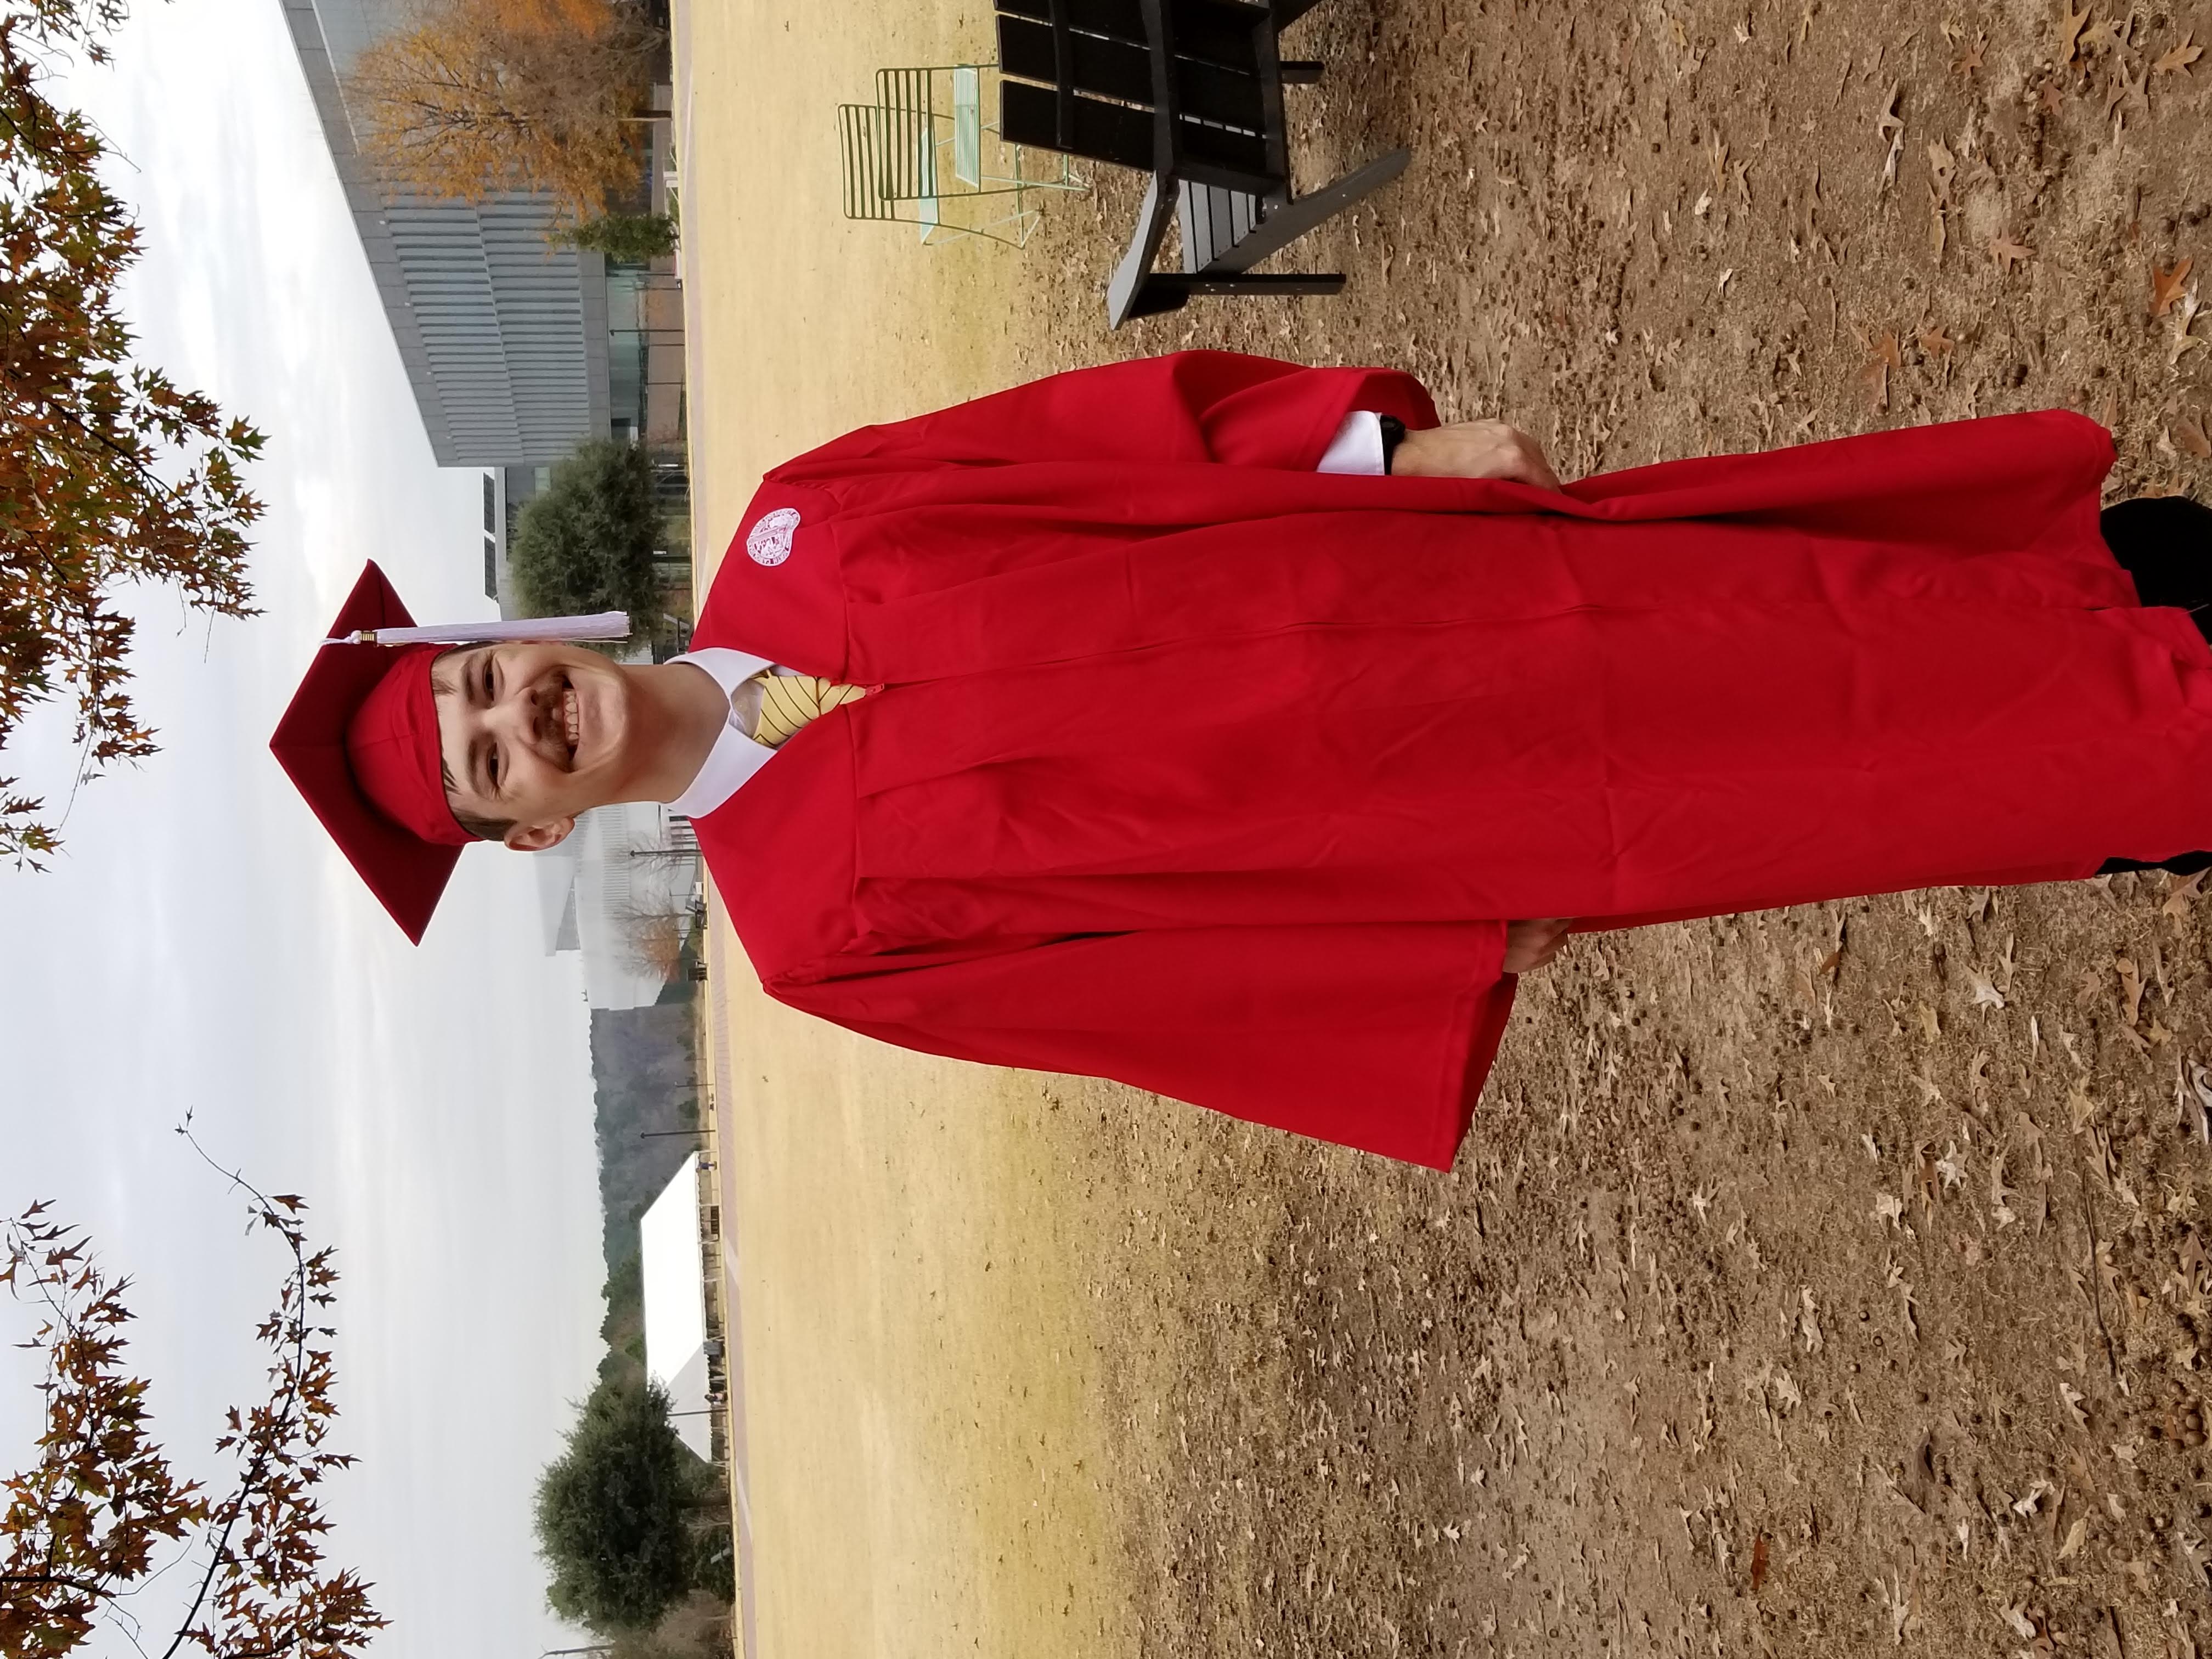 A picture of Michael after graduating with hunt library visible in the background